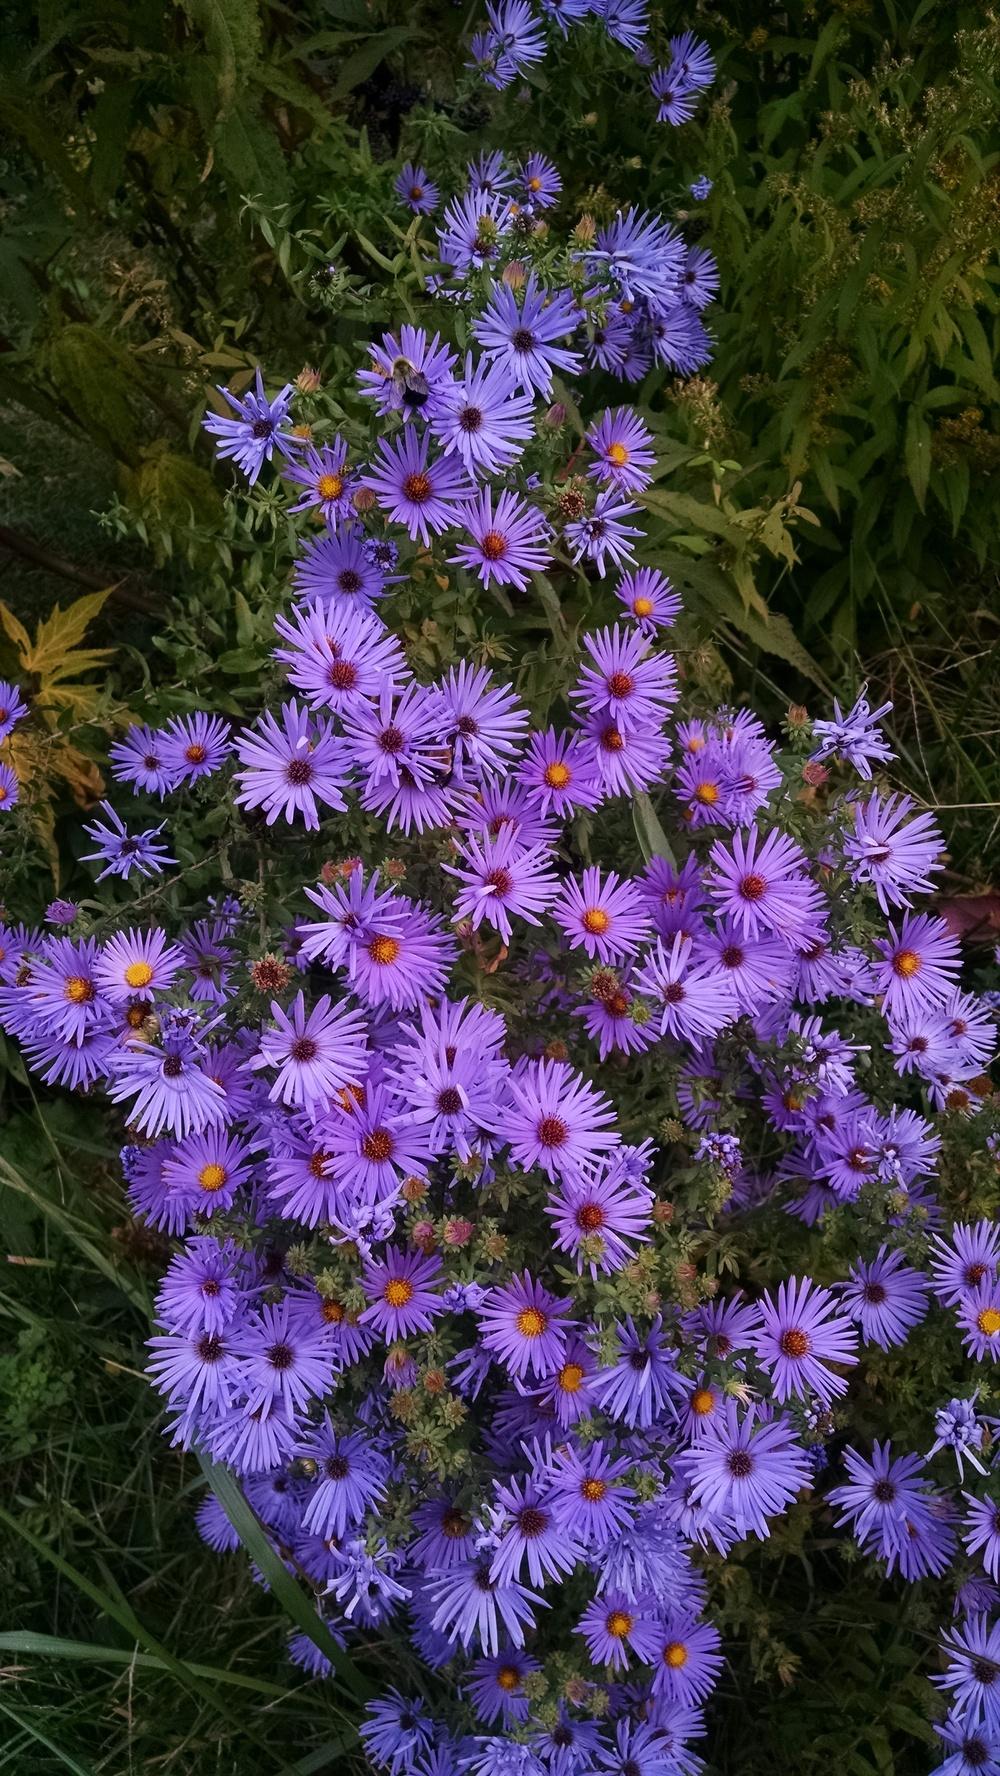 Photo of Aromatic Aster (Symphyotrichum oblongifolium 'Raydon's Favorite') uploaded by Catmint20906